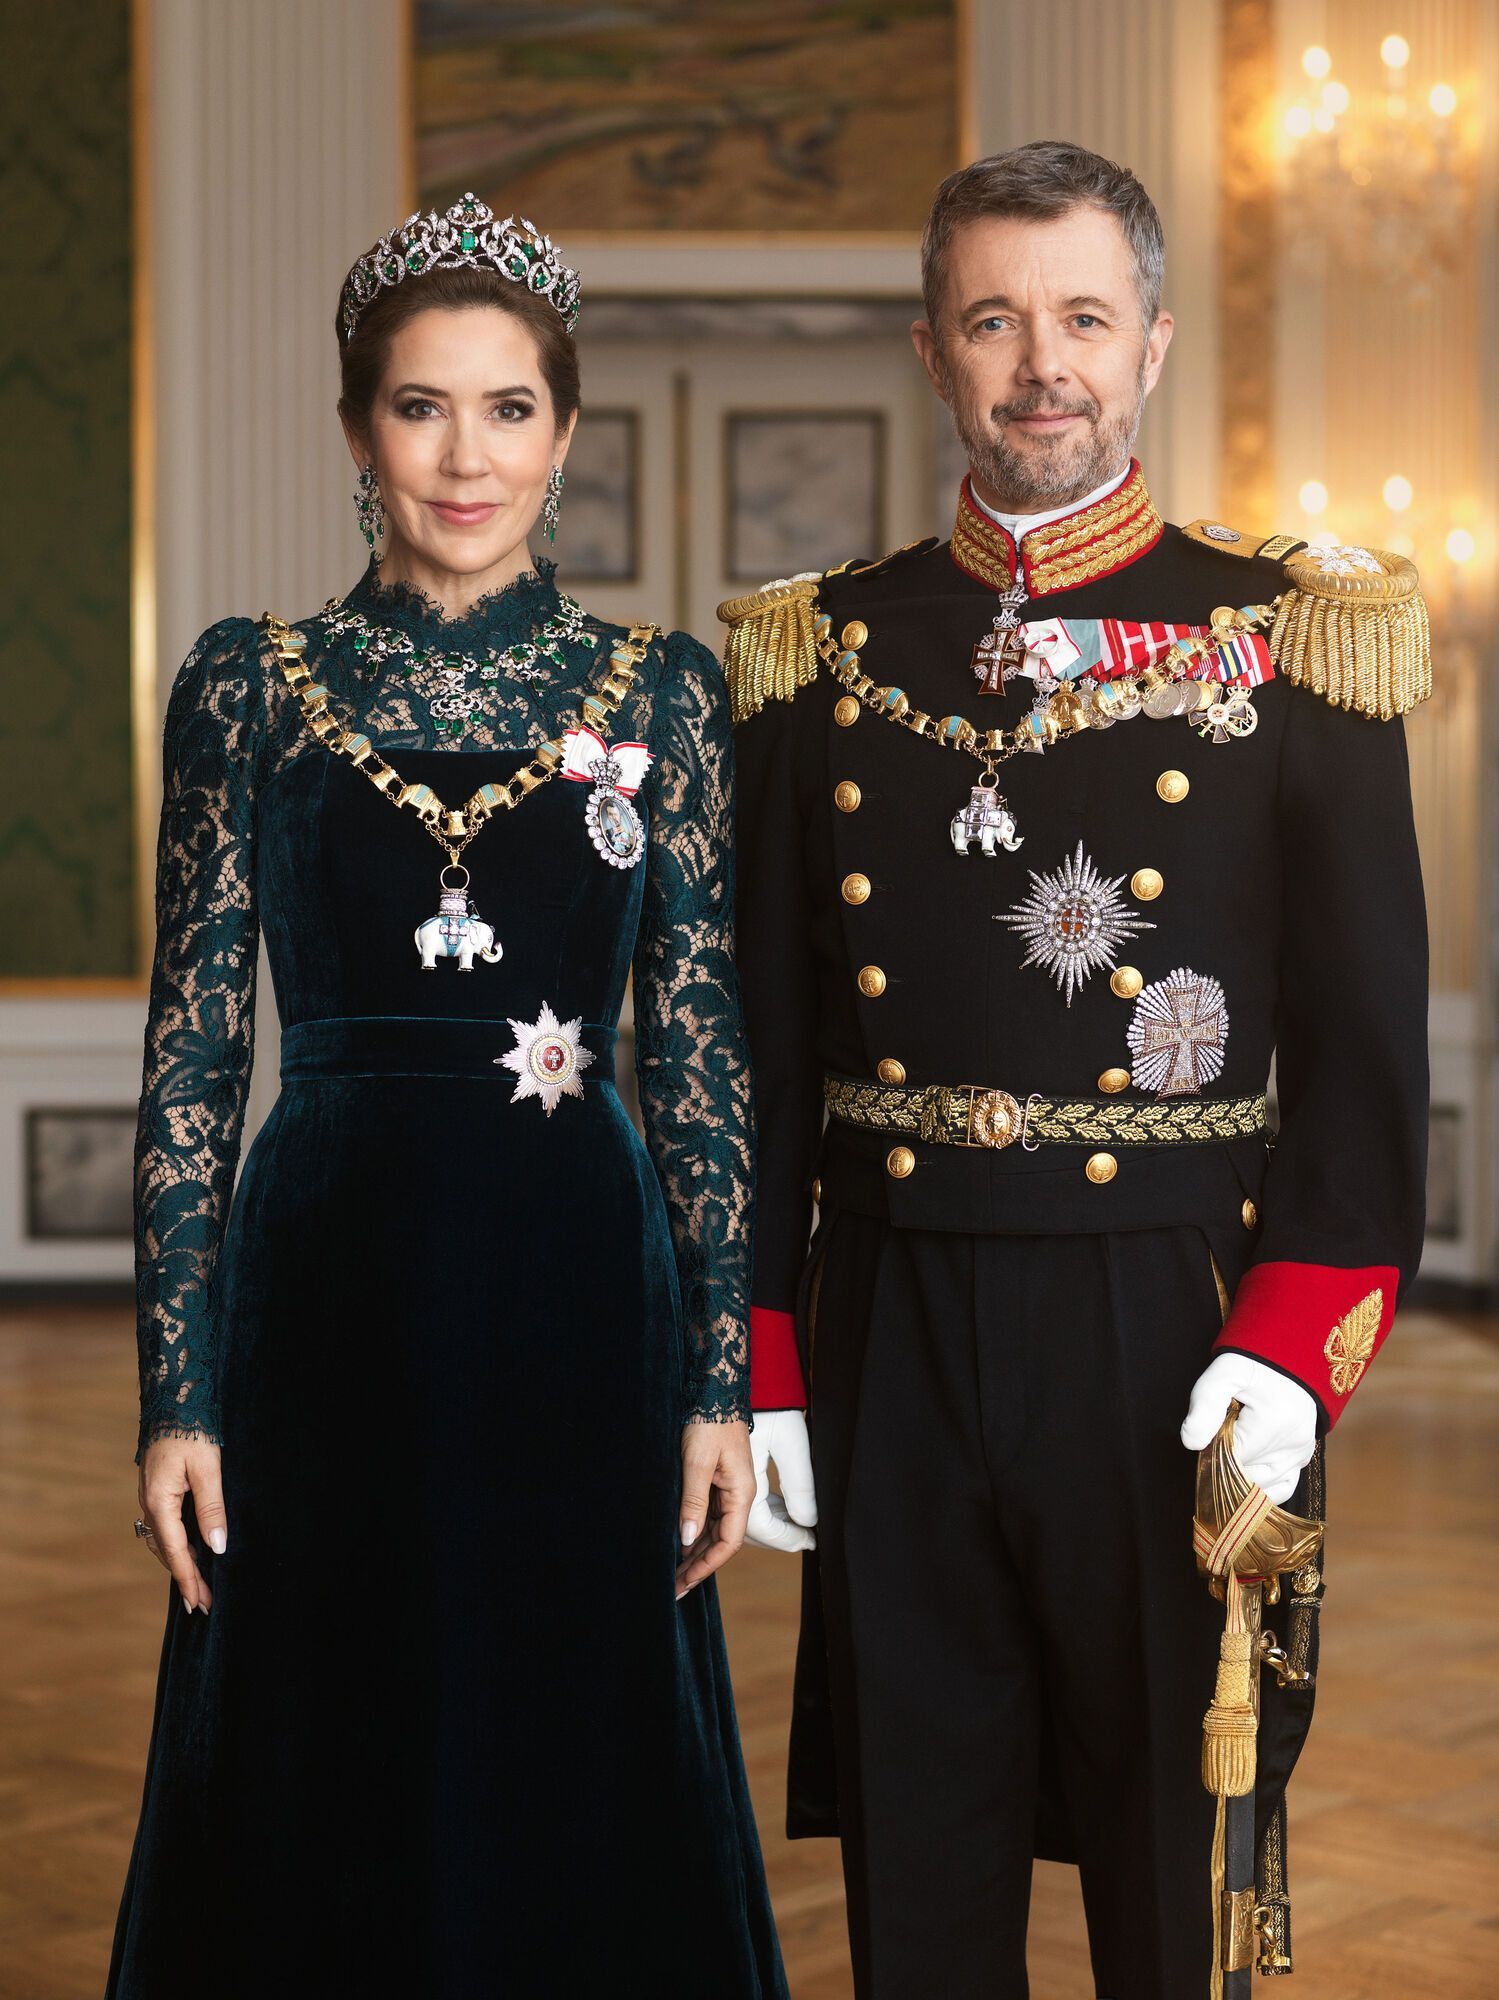 Two separate photos? King Frederick X of Denmark and his wife are also caught up in the Photoshop scandal